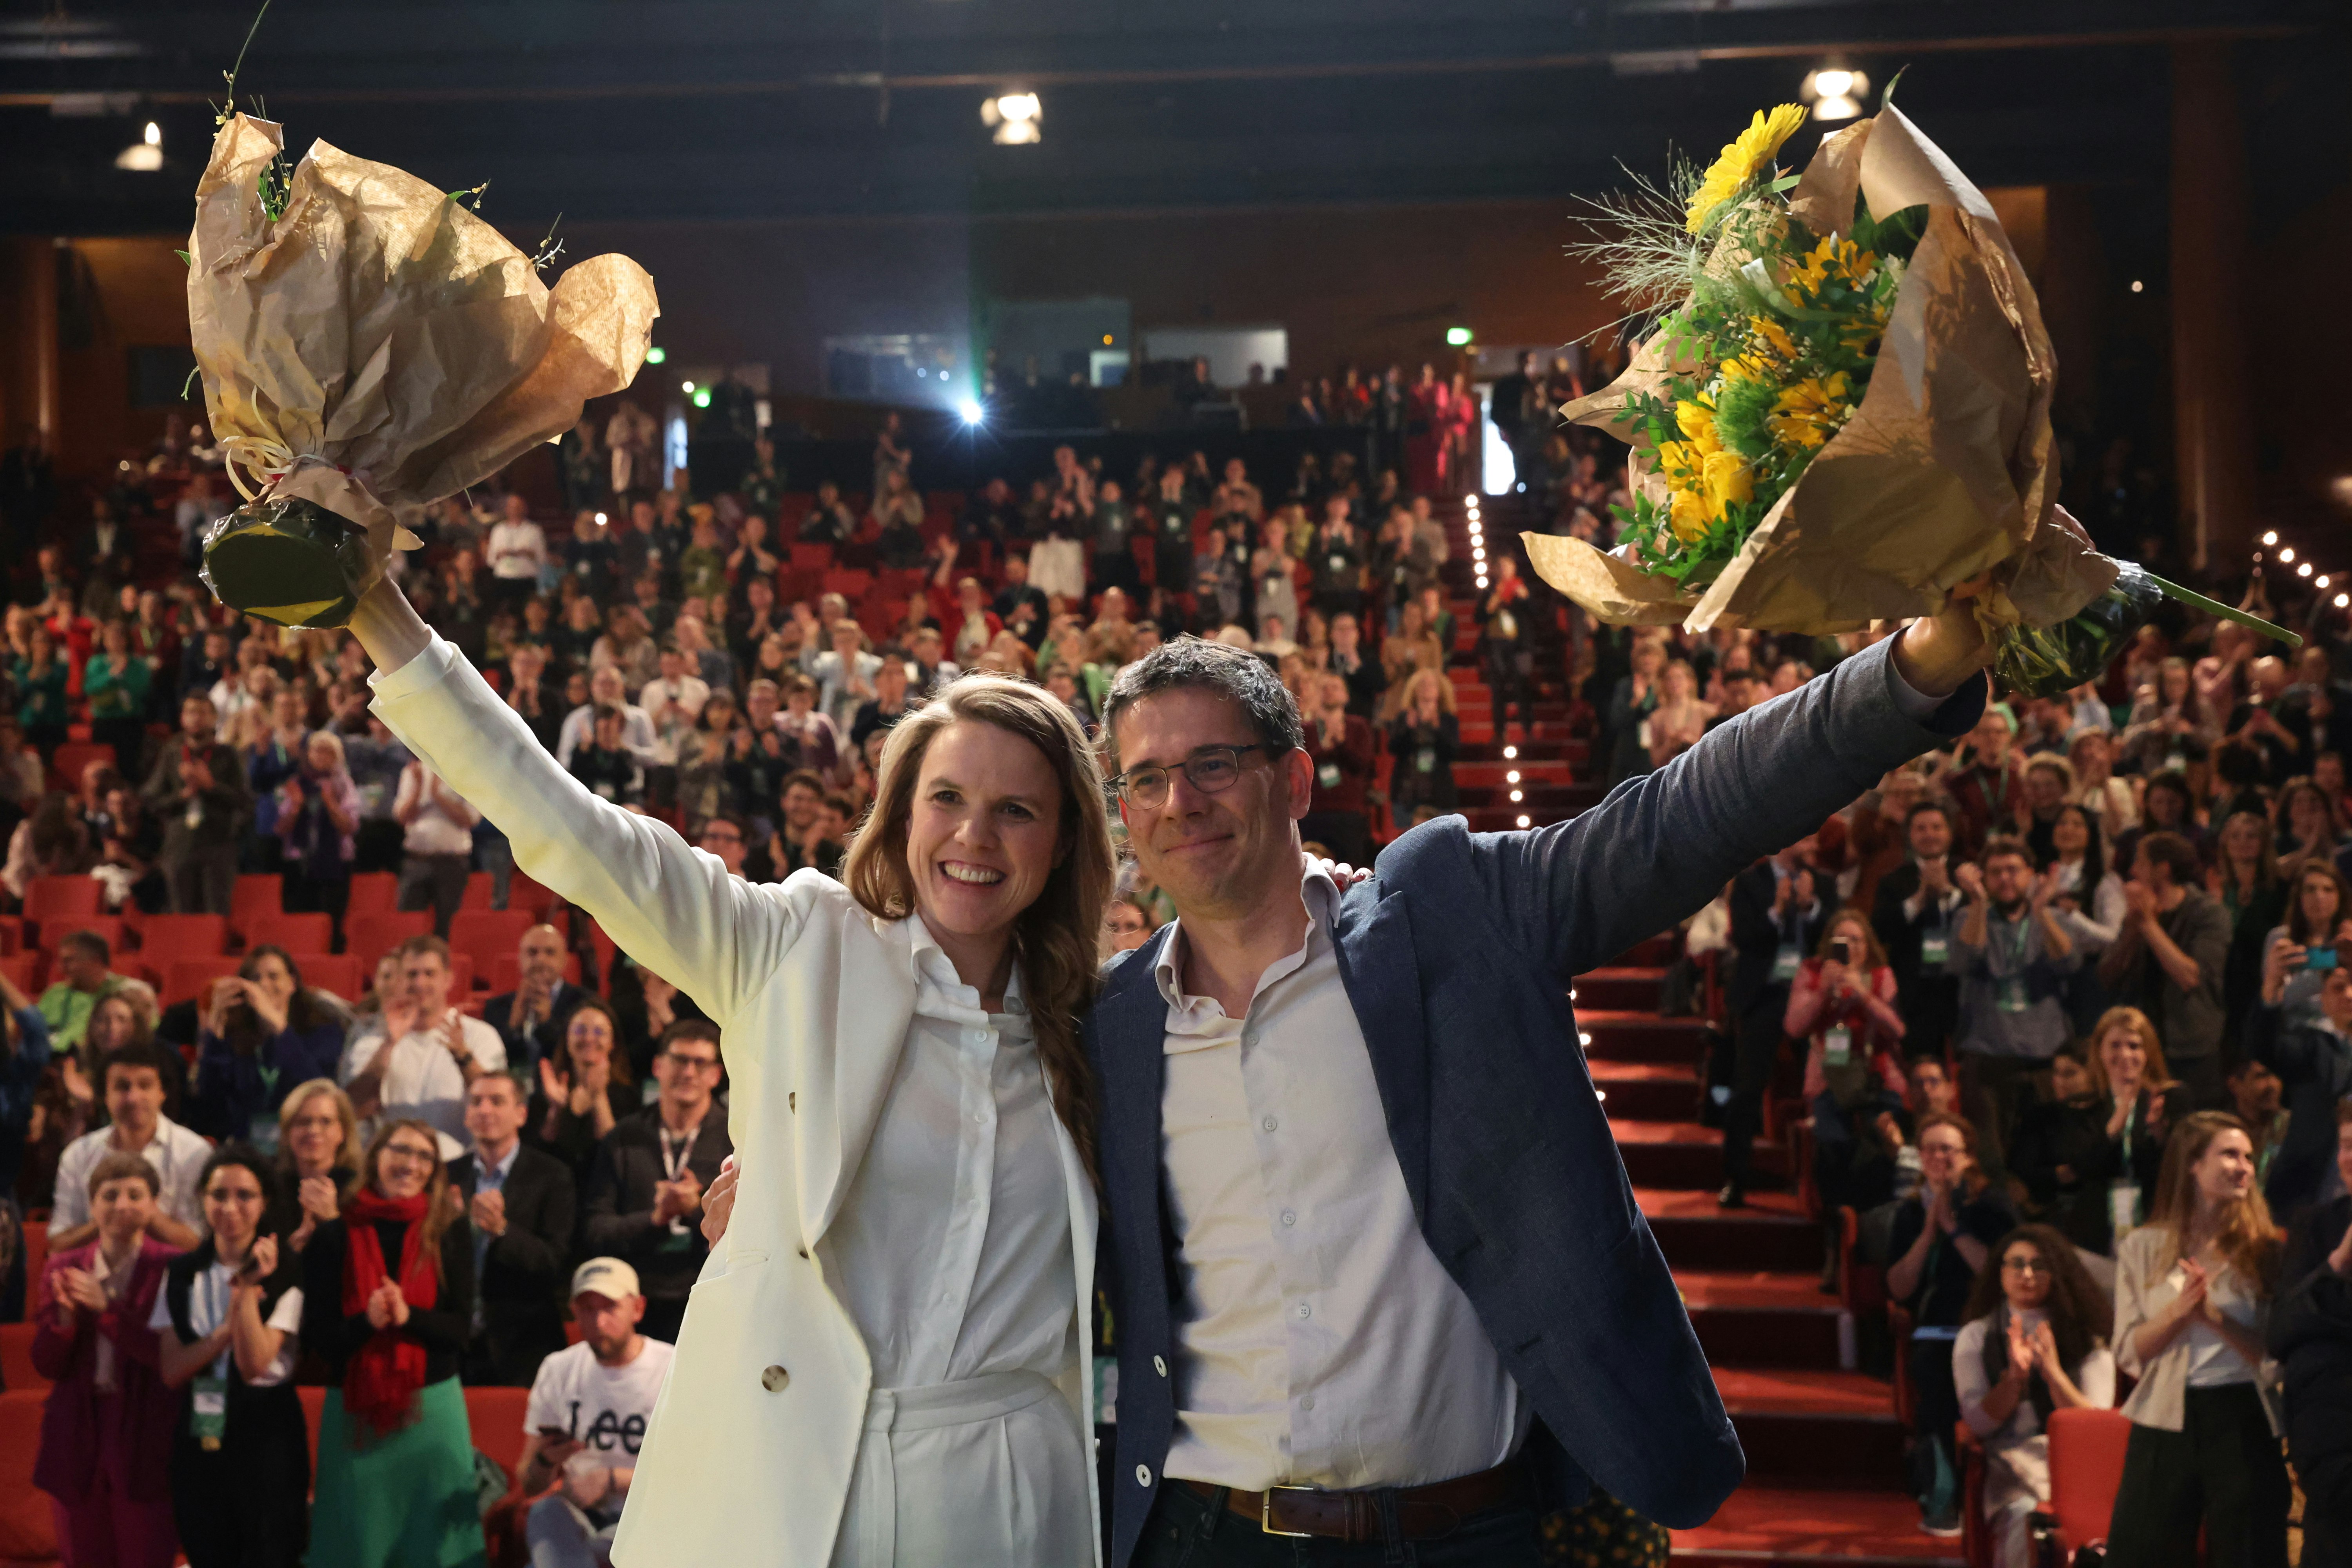 Terry Reintke and Bas Eickhout elected as Spitzenkandidaten at the European Green Party Extended Congress, Lyon France on 3 Feb 2024